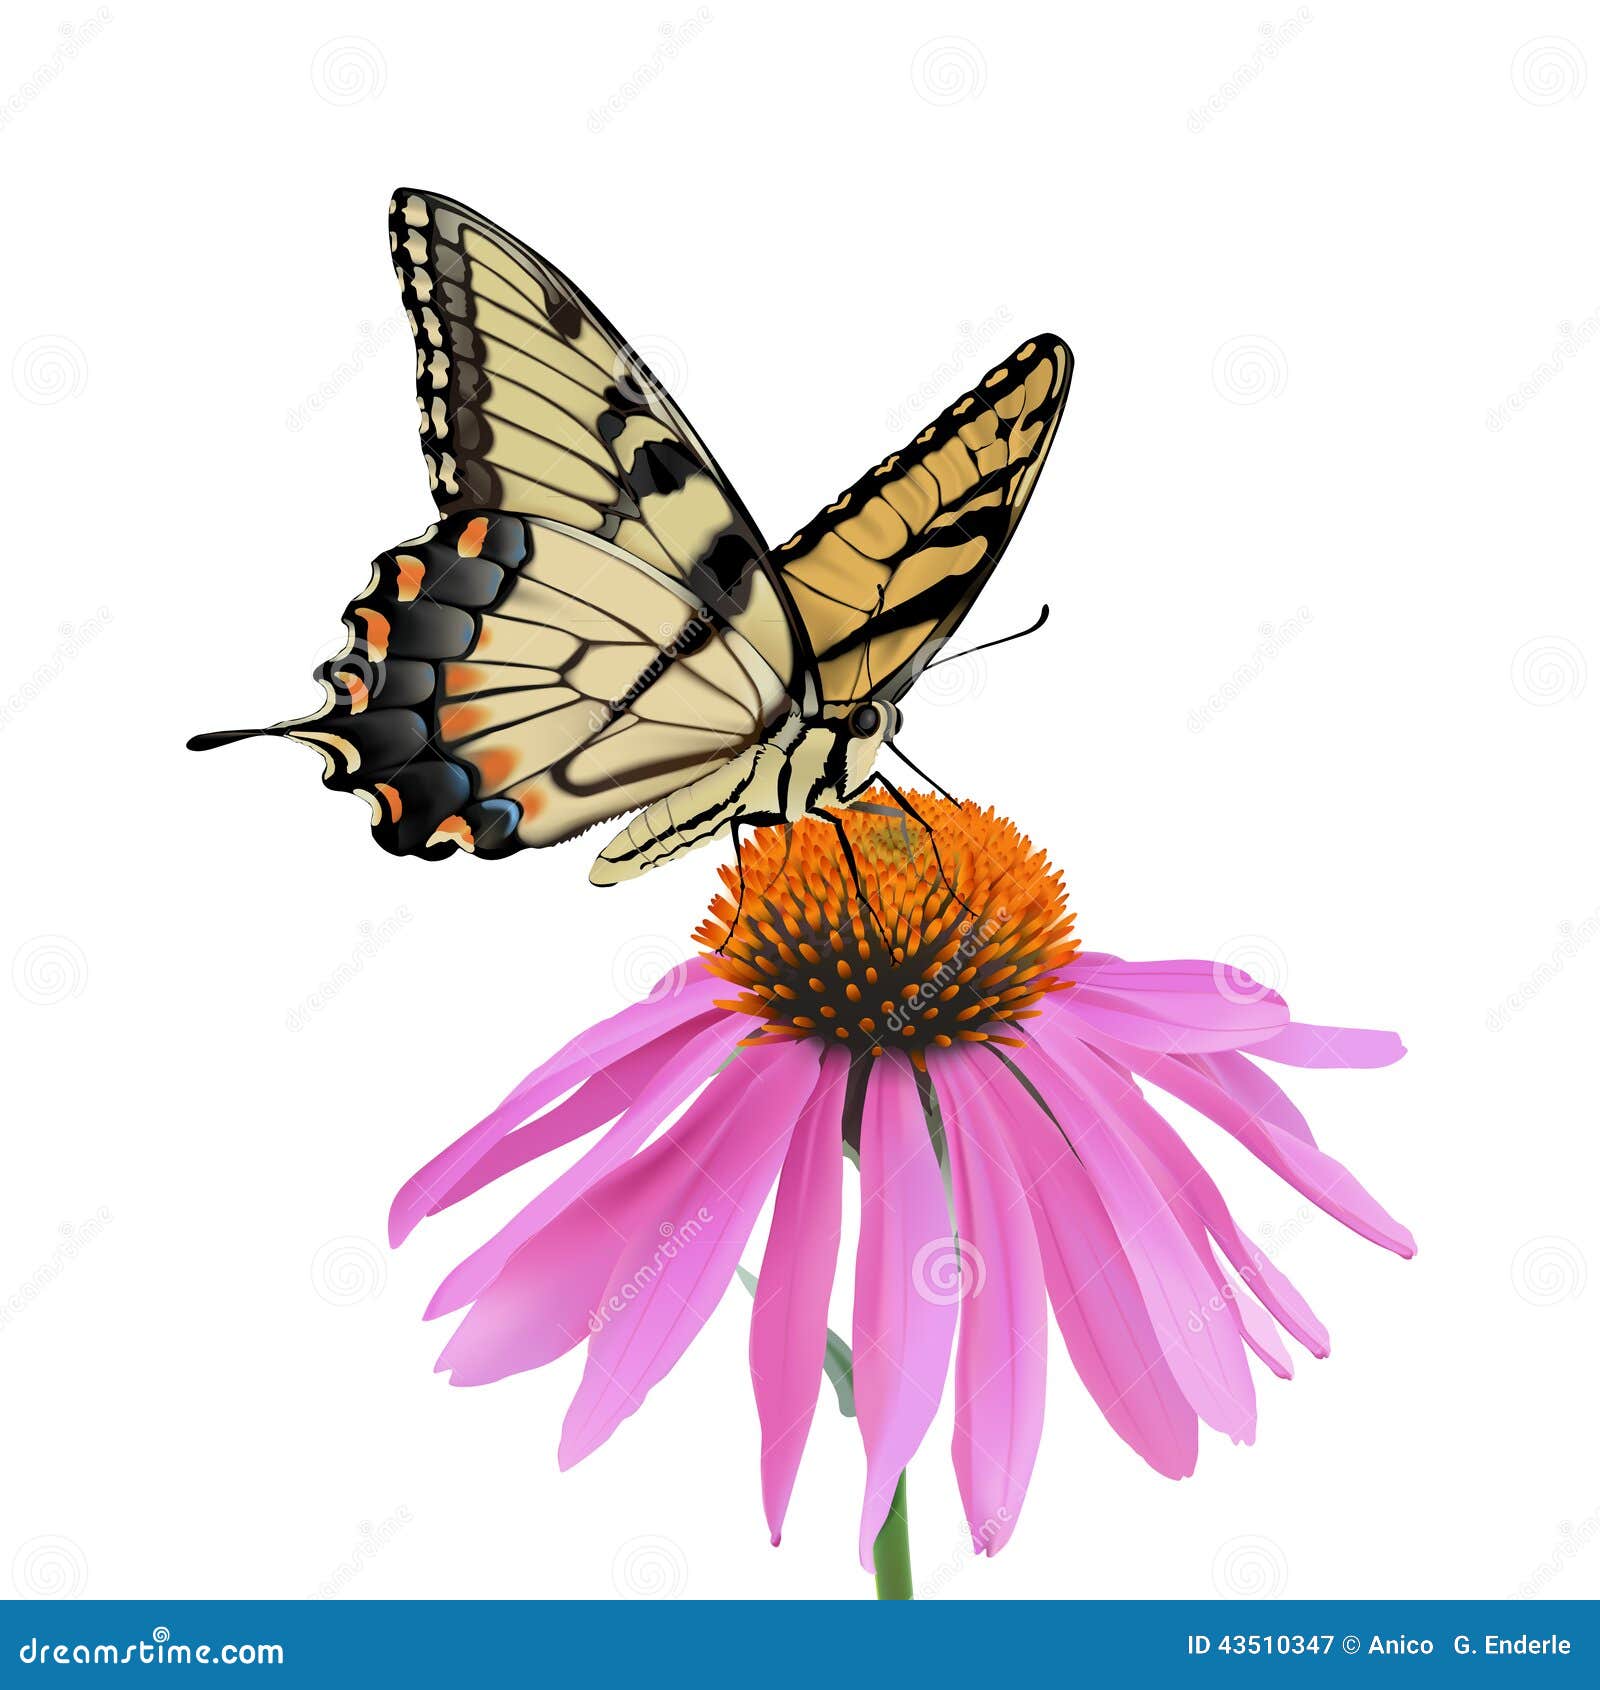 swallowtail butterfly and coneflower